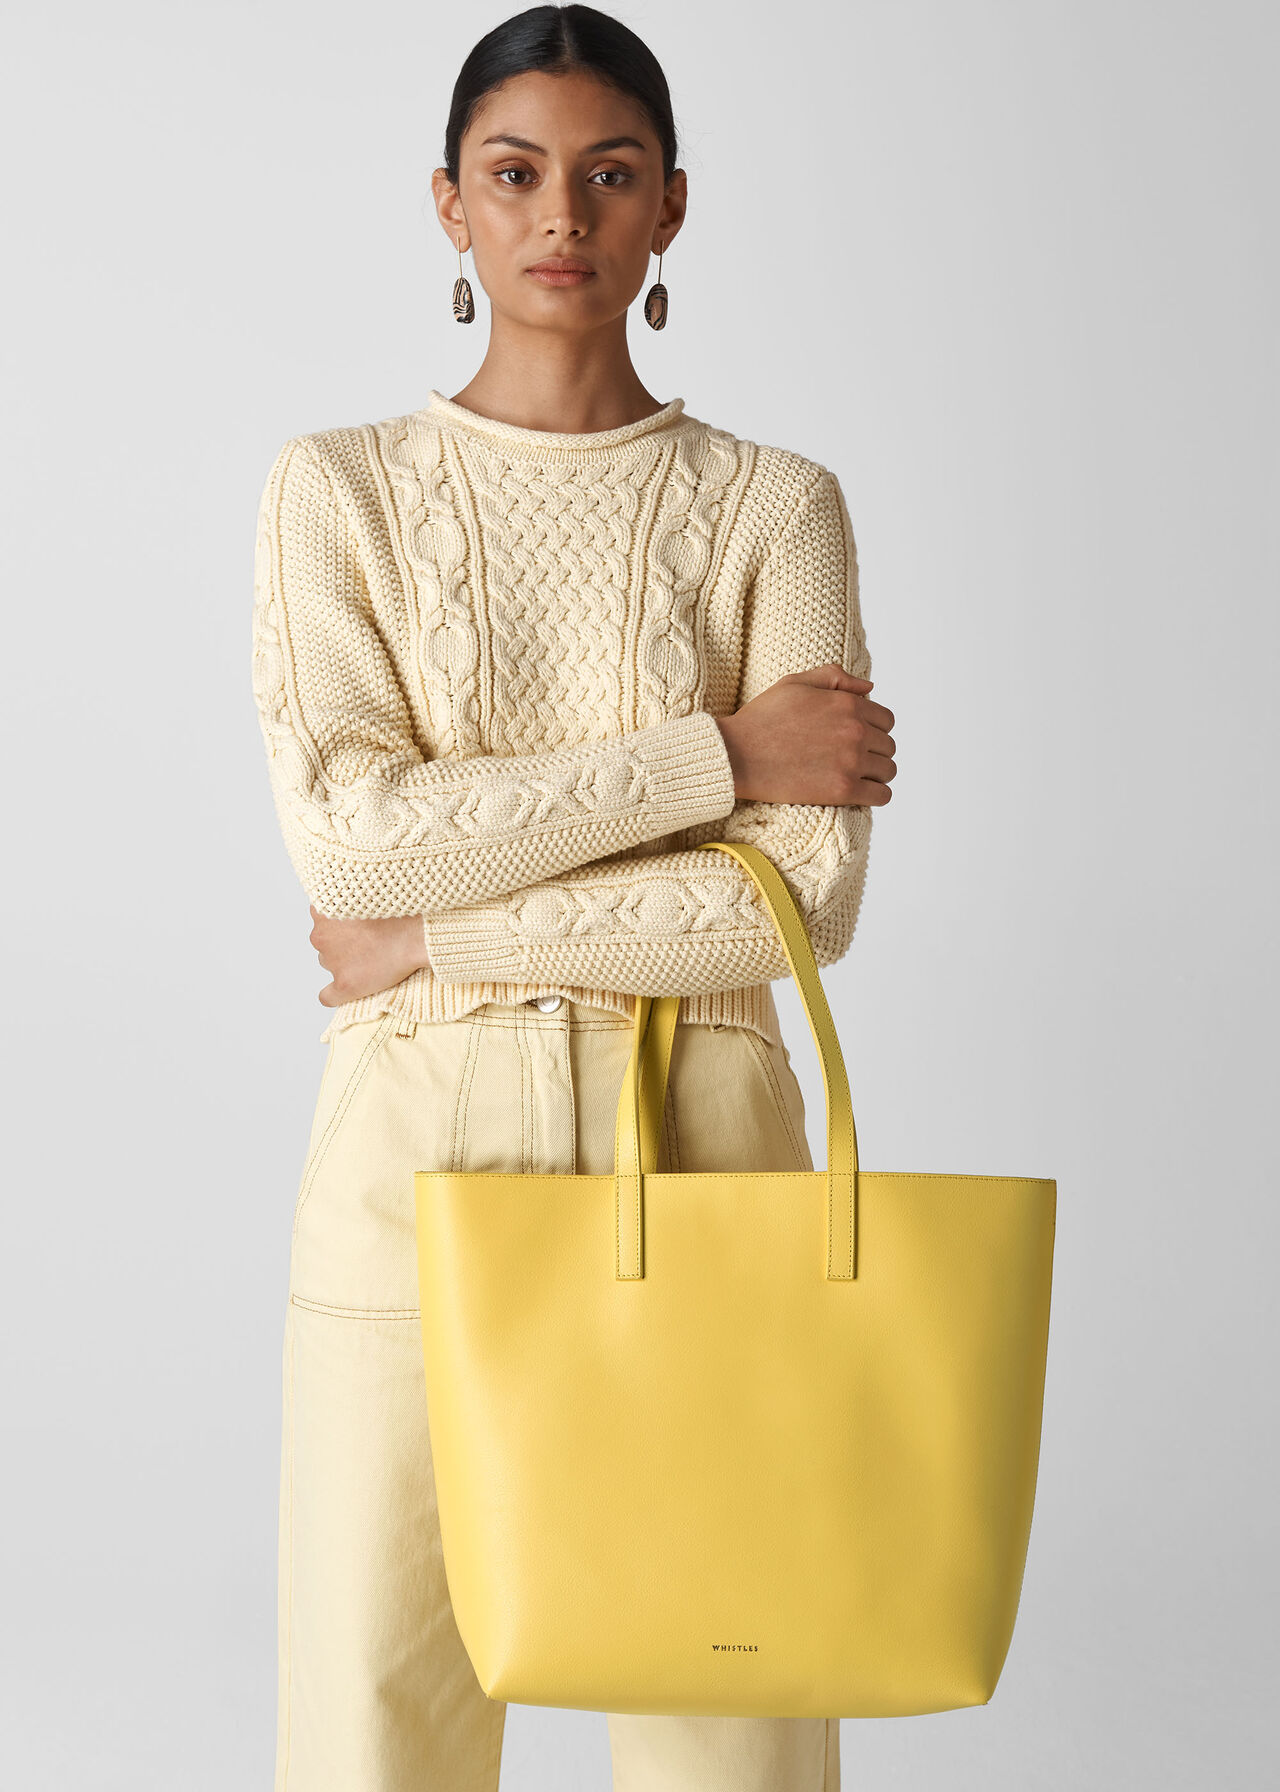 Denmark Unlined Leather Tote Yellow